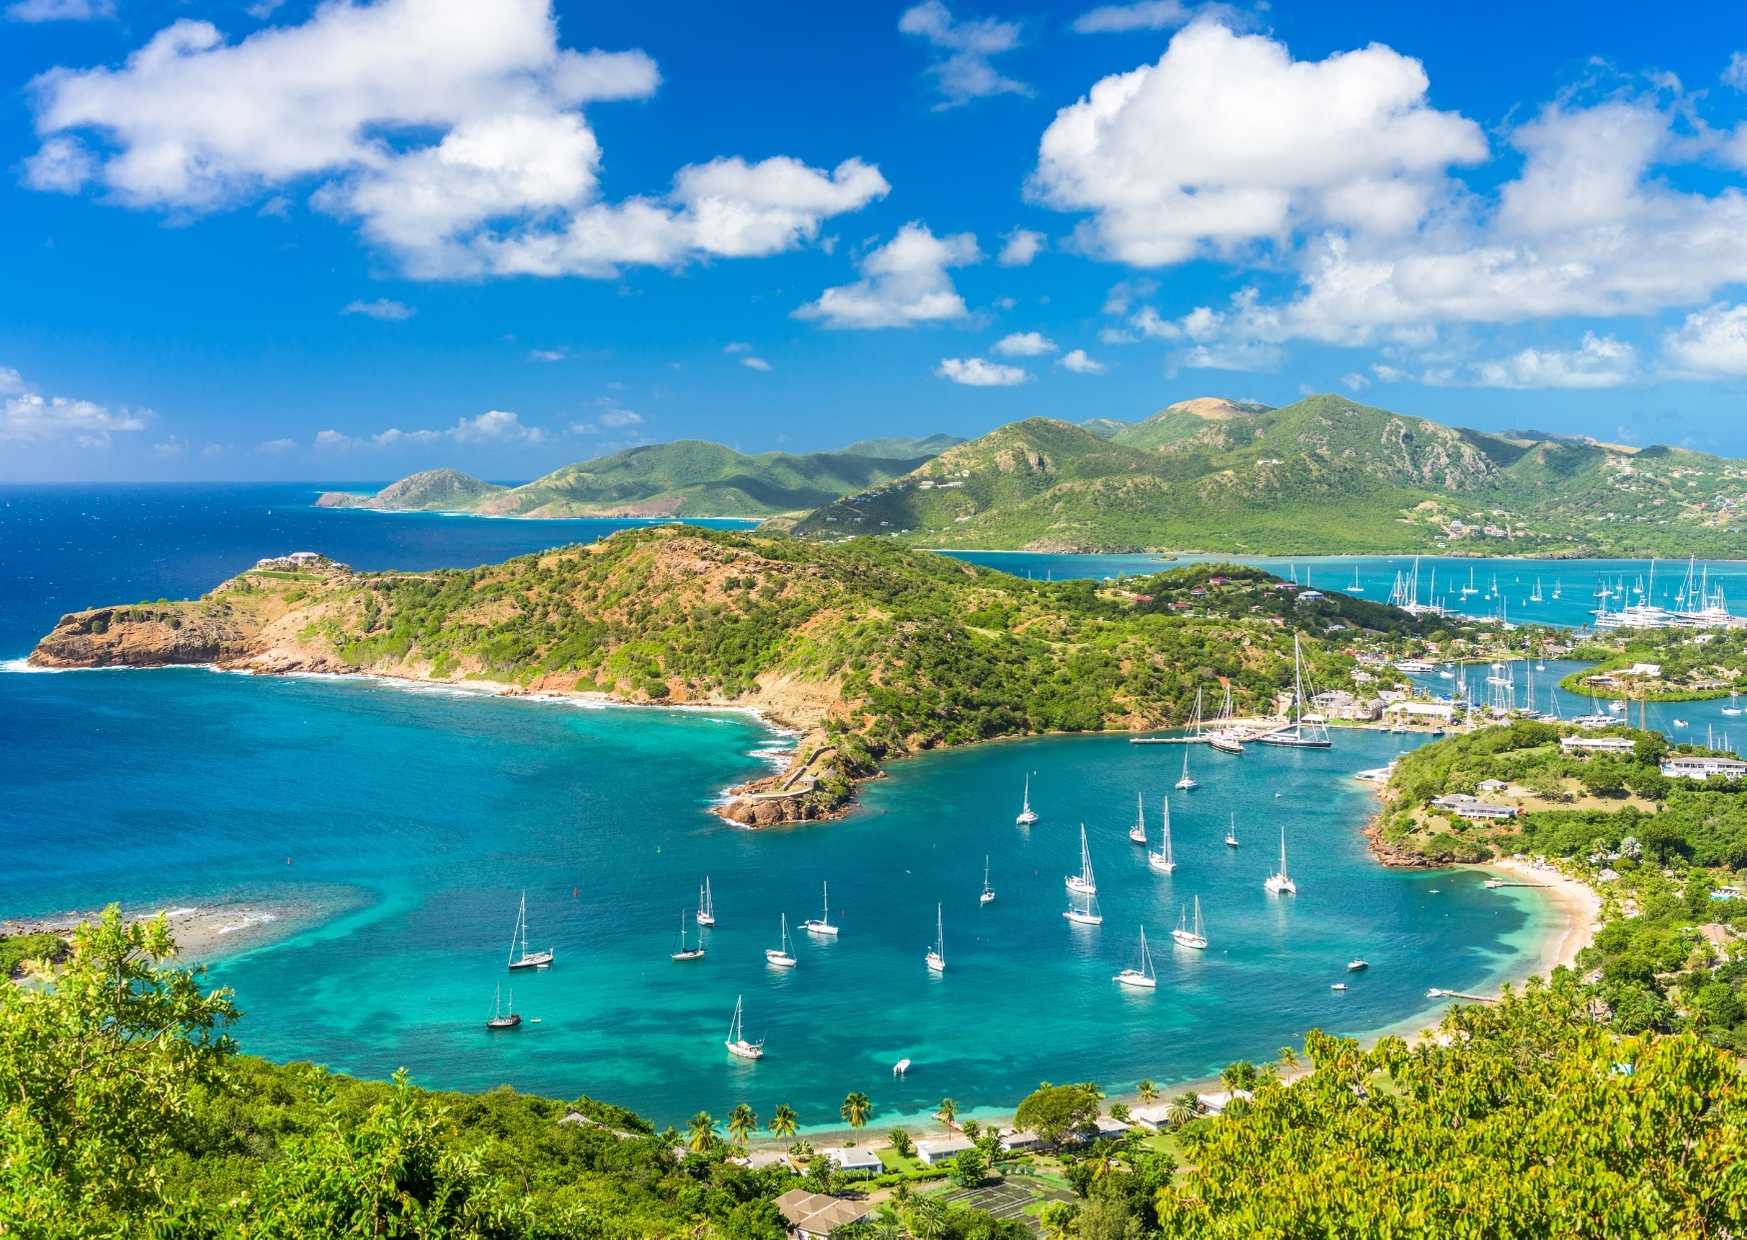 The Antigua Attraction: Why this Caribbean island has become a recent sailing hot spot